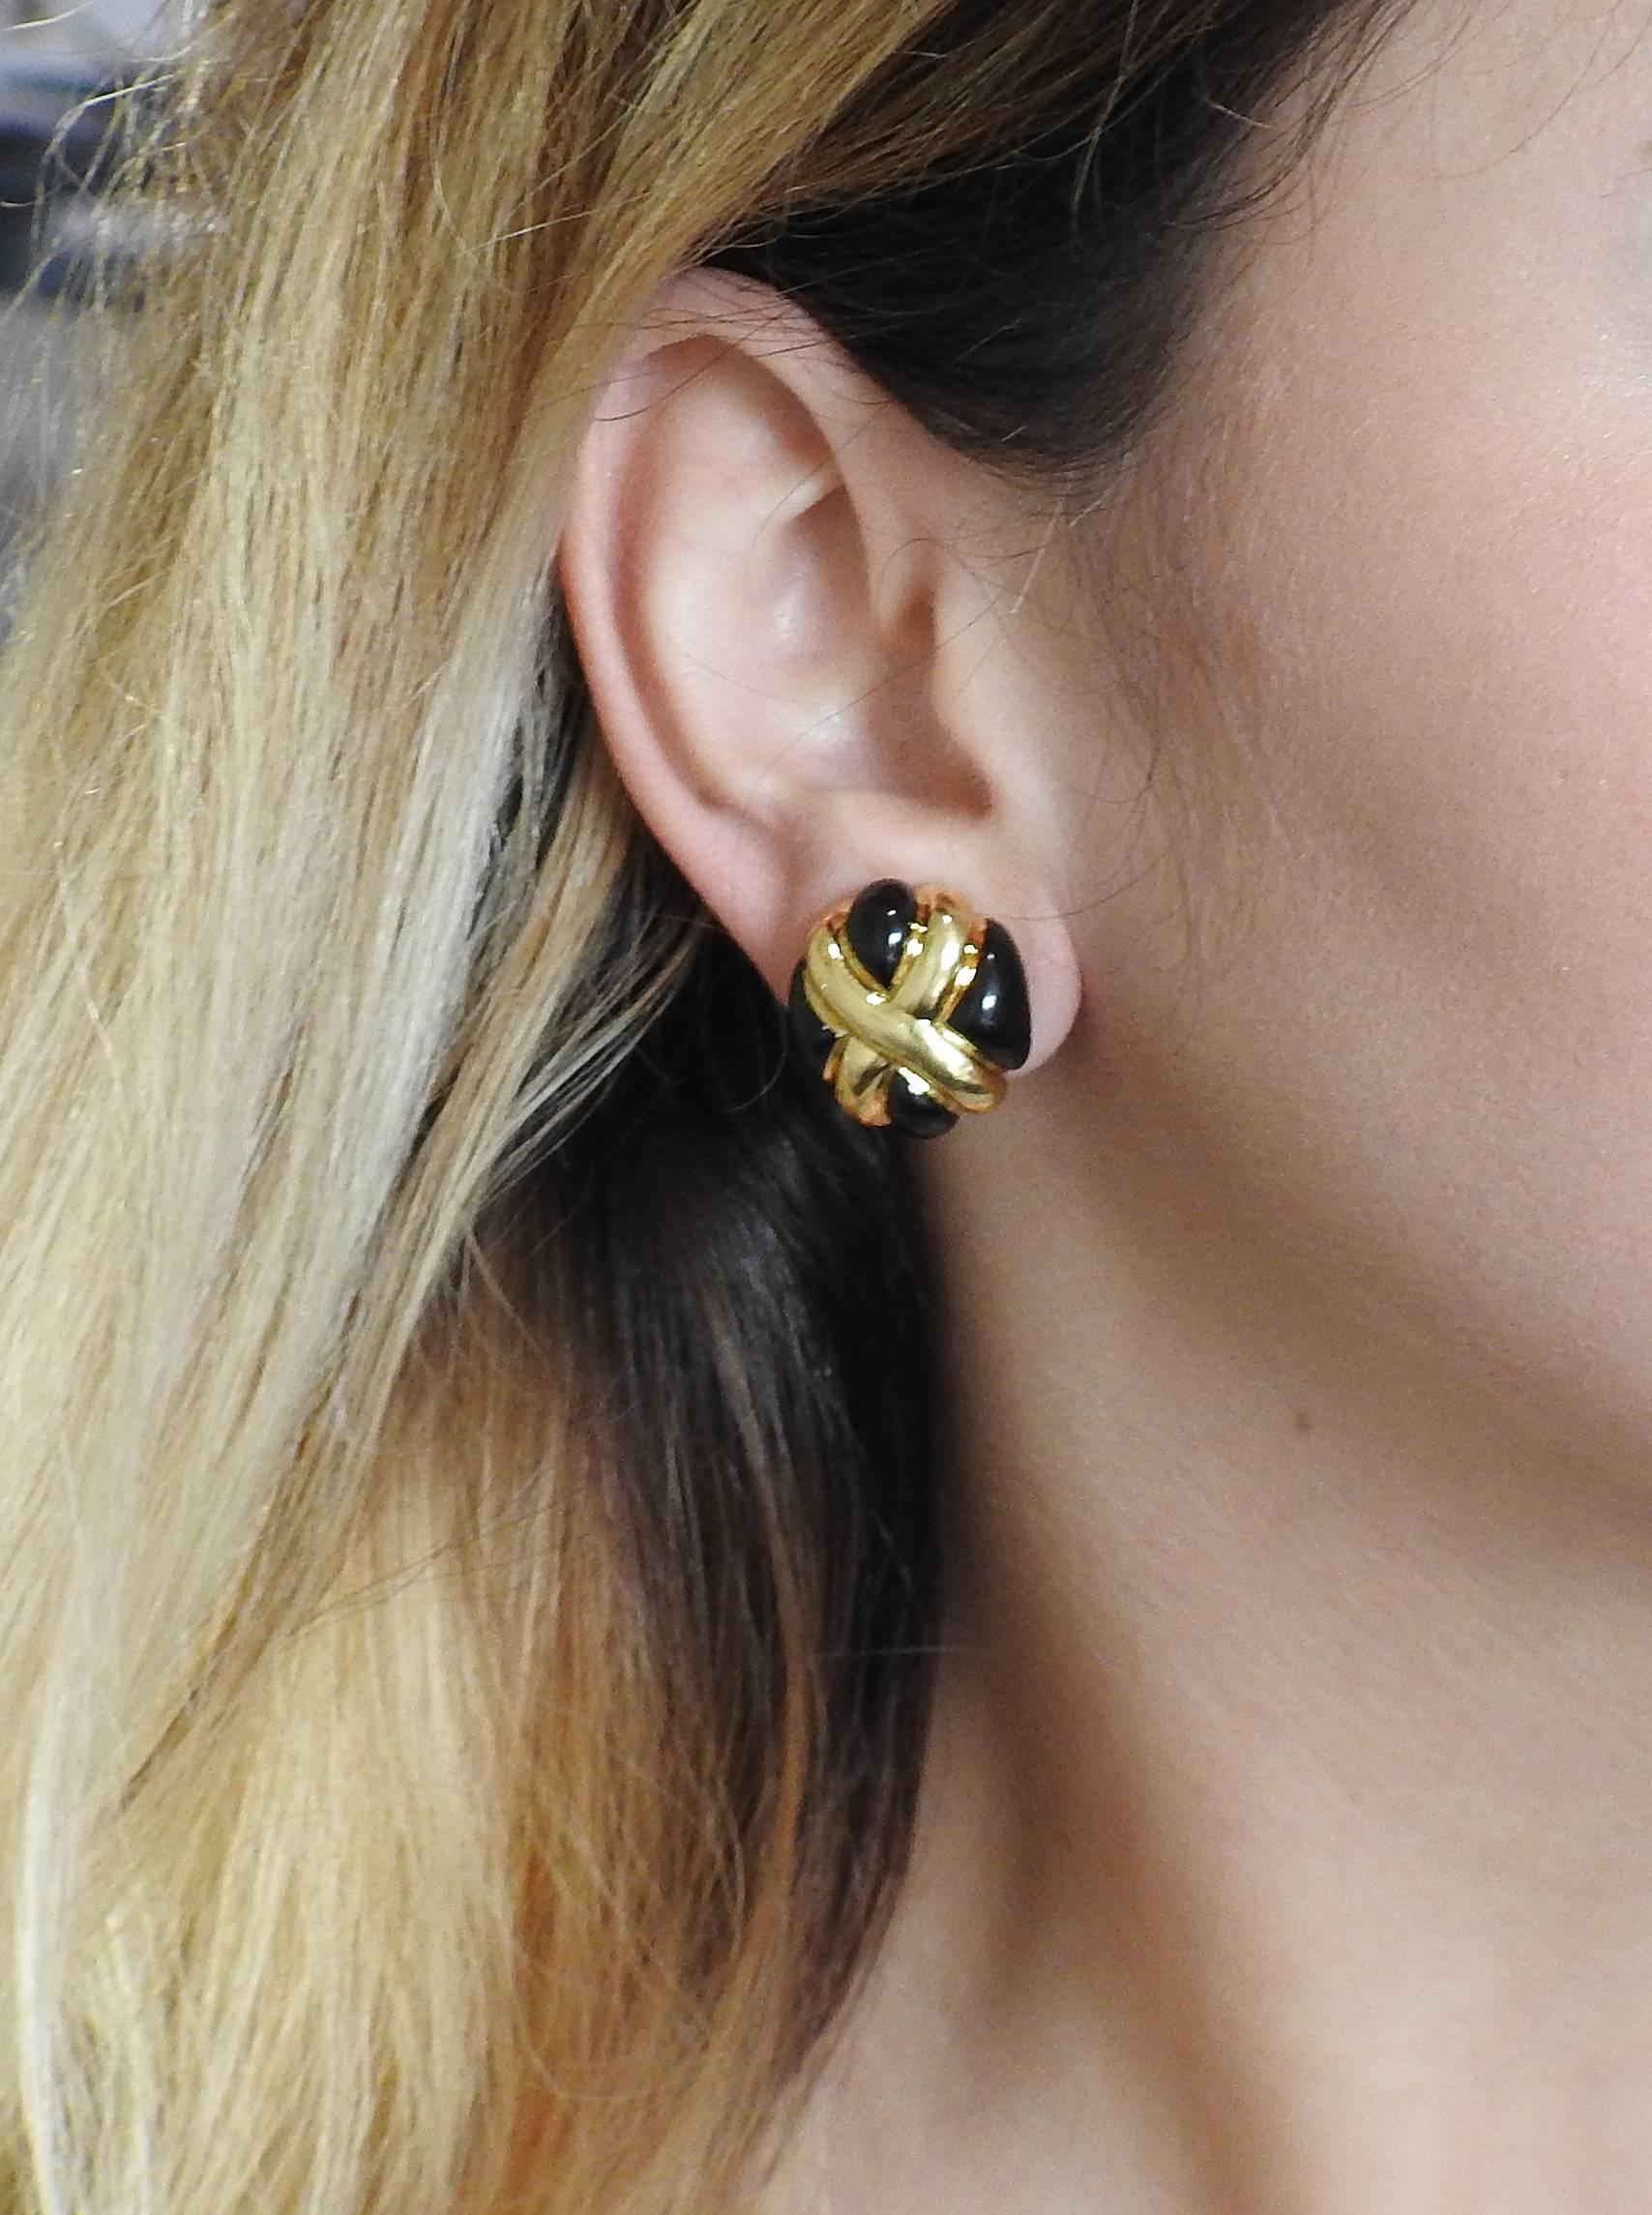 A pair of classic 18k yellow gold earrings, crafted by Andrew Clunn, decorated with onyx. Earrings are 25mm x 21mm and weigh 22.8 grams. Marked: 18k, A.Clunn